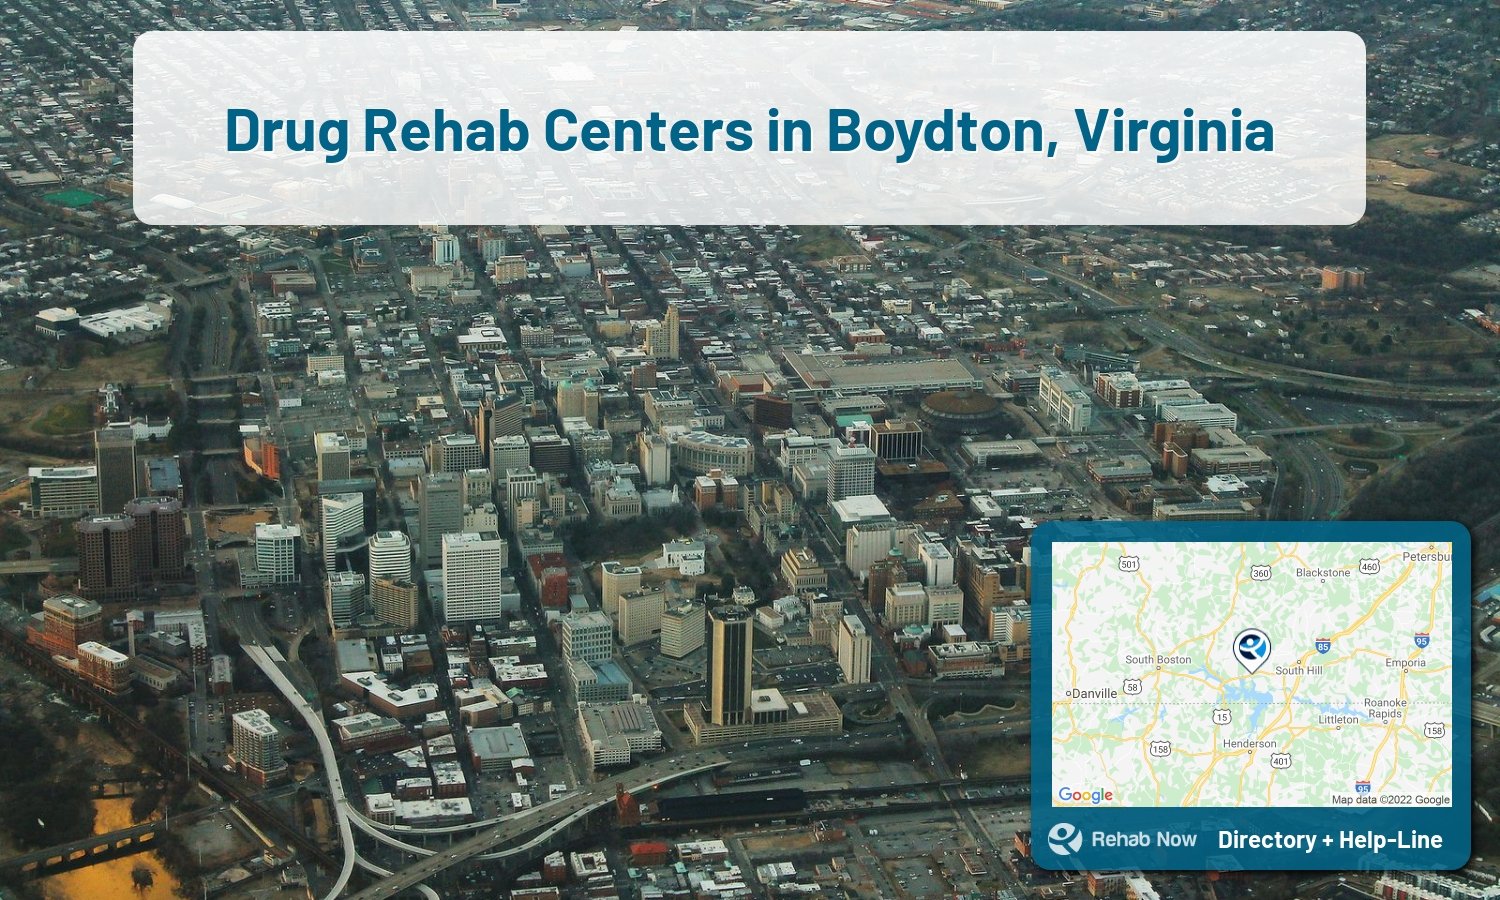 Drug rehab and alcohol treatment services nearby Boydton, VA. Need help choosing a treatment program? Call our free hotline!